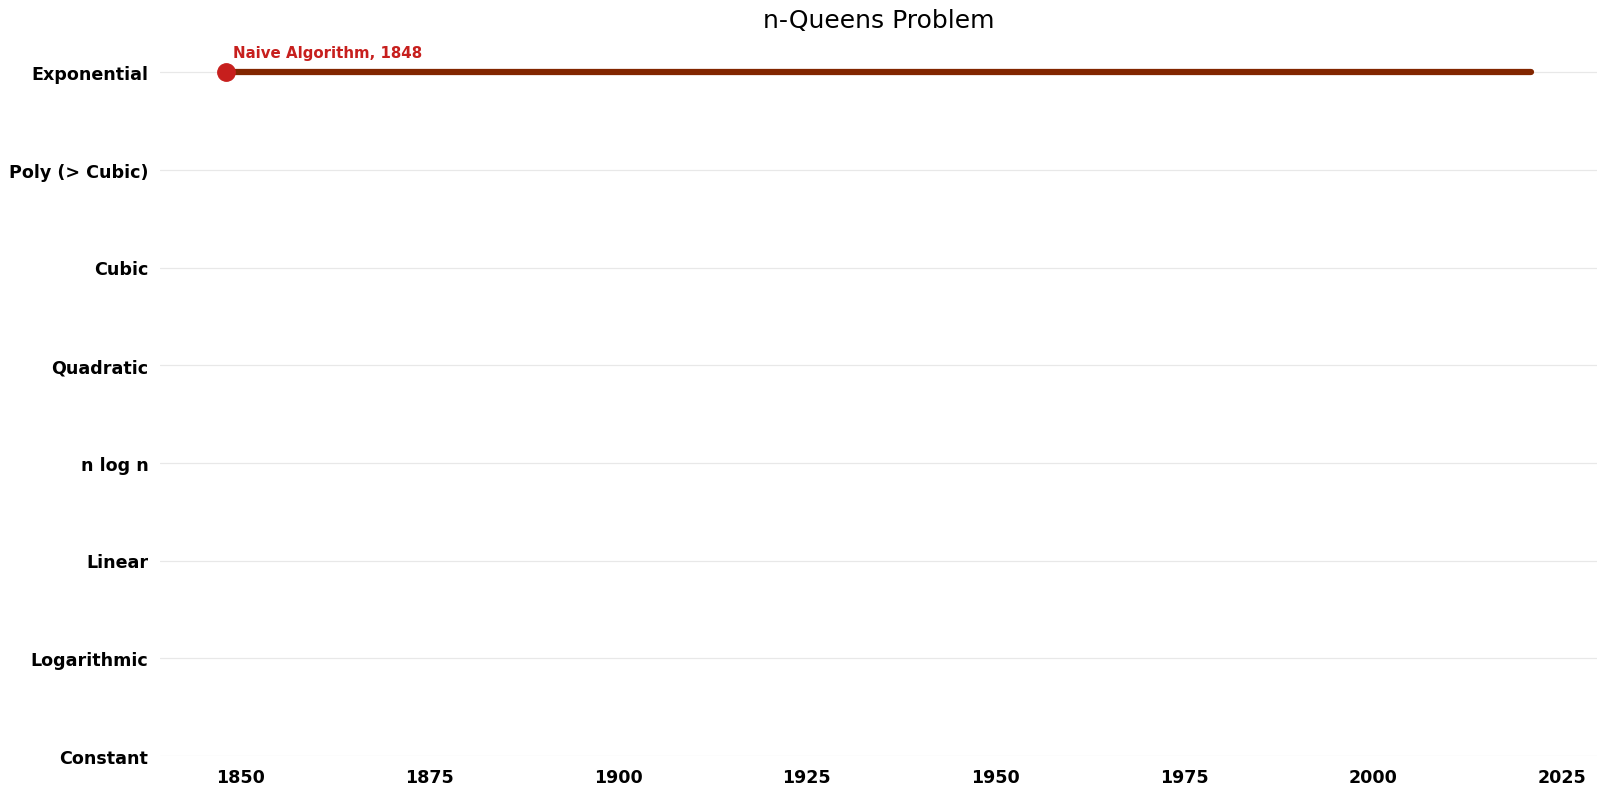 File:N-Queens Problem - Time.png